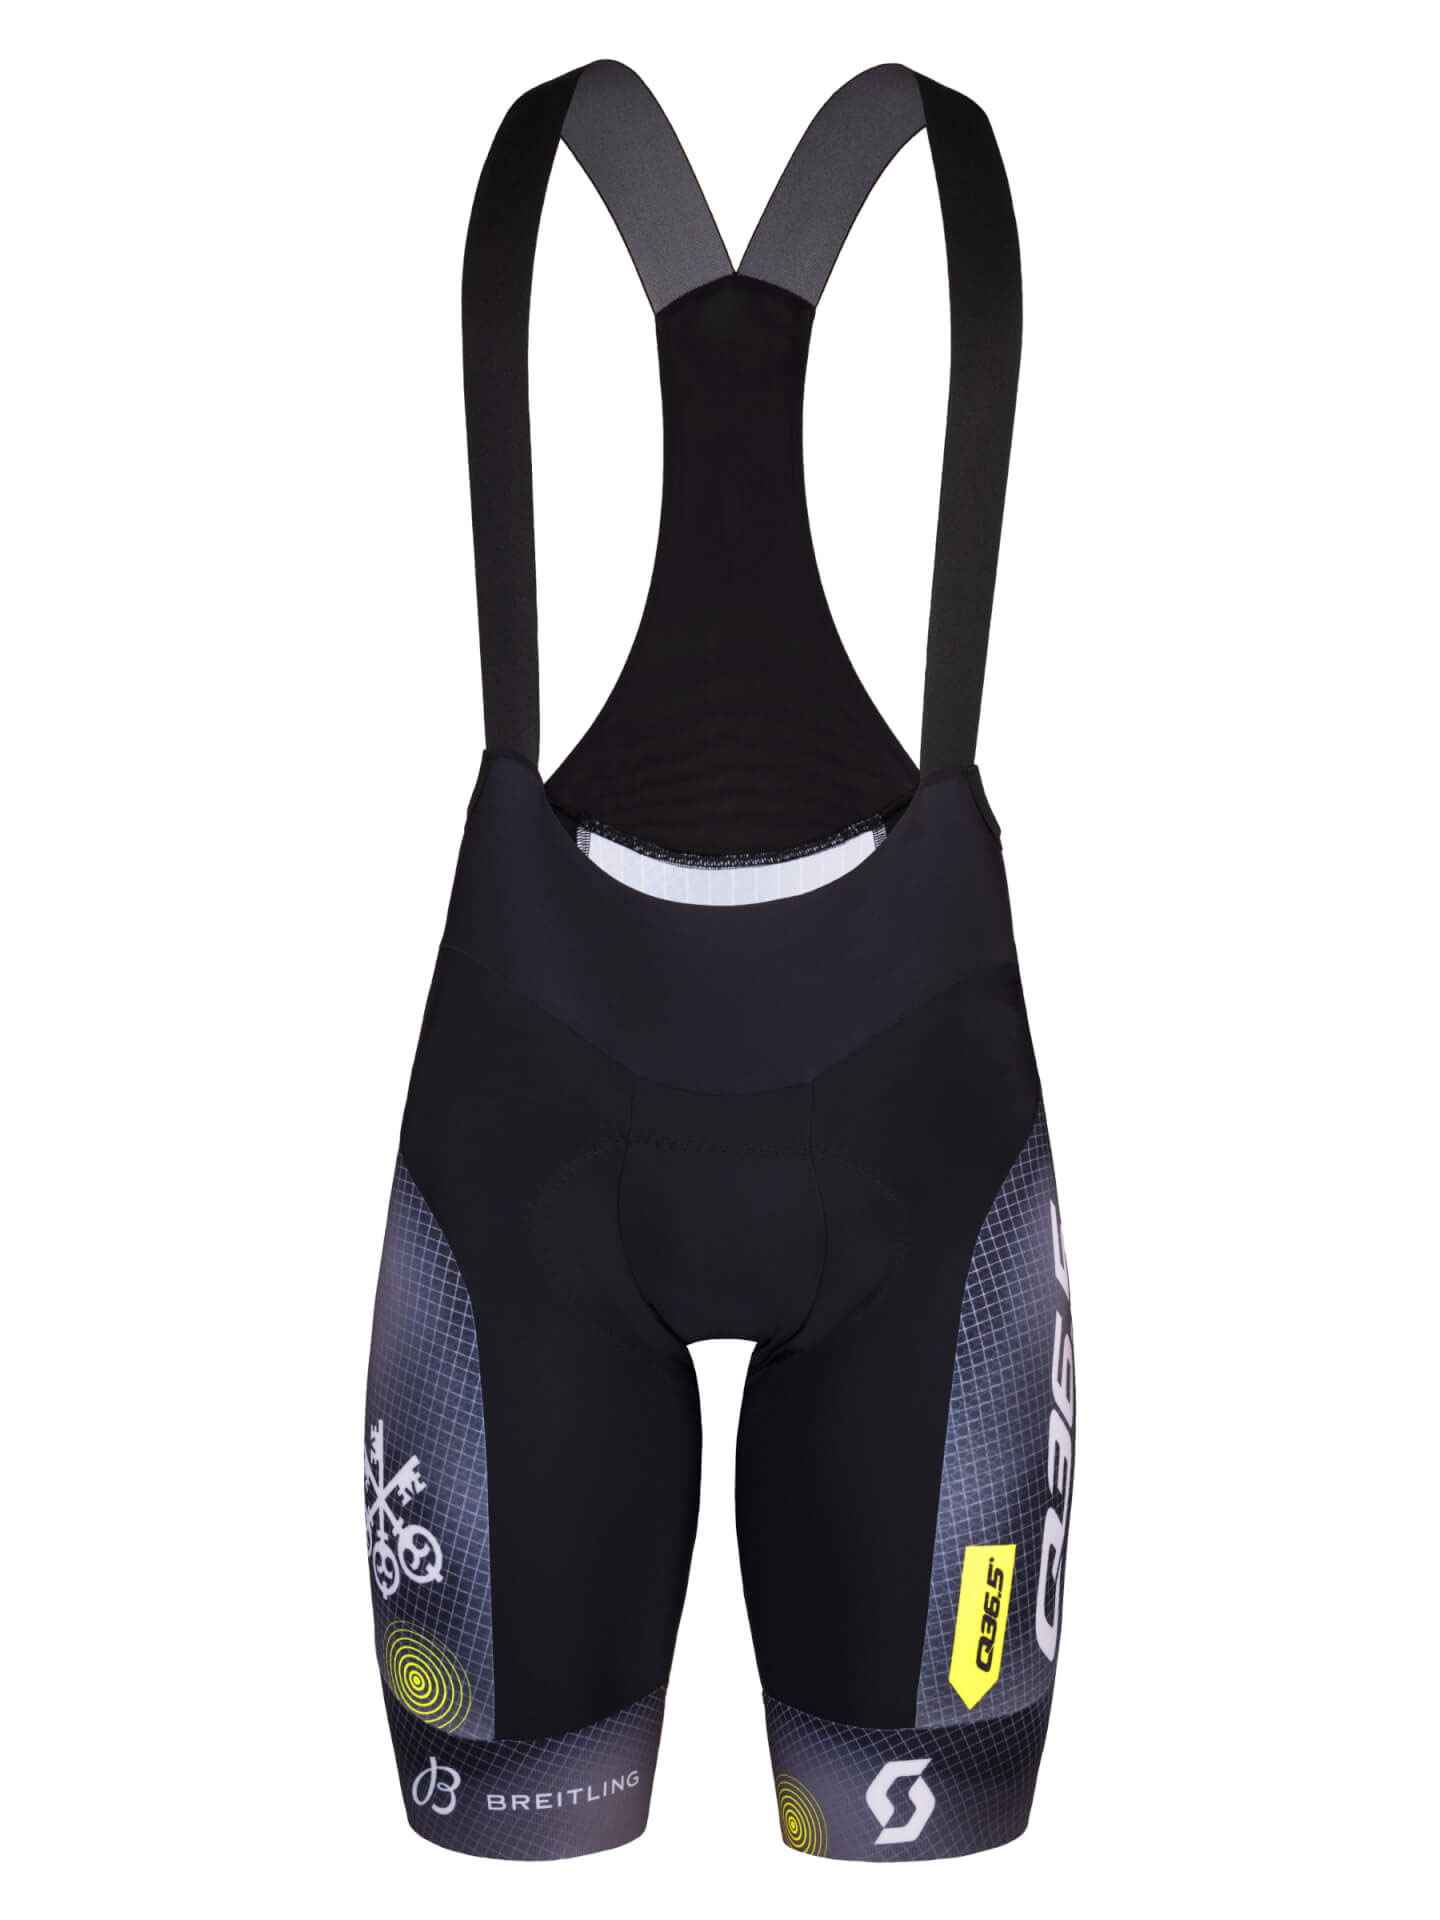 Field Tested: The Q36.5 Gregarius Ultra Bib Short – Above Category